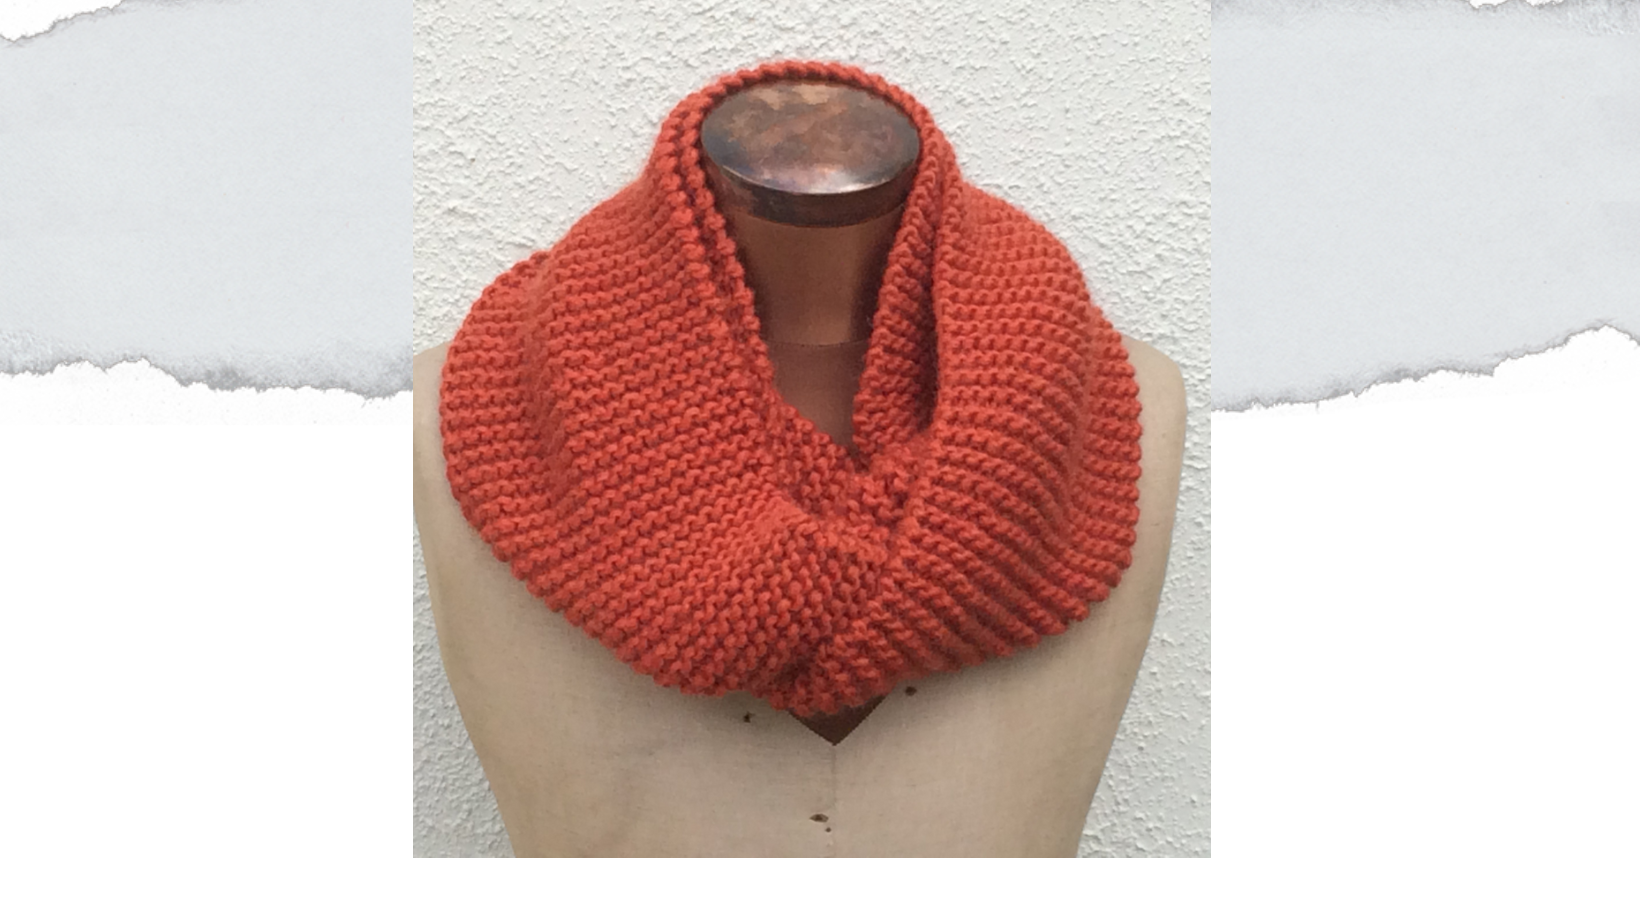 knitted cowl in garter stitch using rust coloured yarn. Wrapped twice around the neck of a sewing dummy. Made from free knitting pattern.